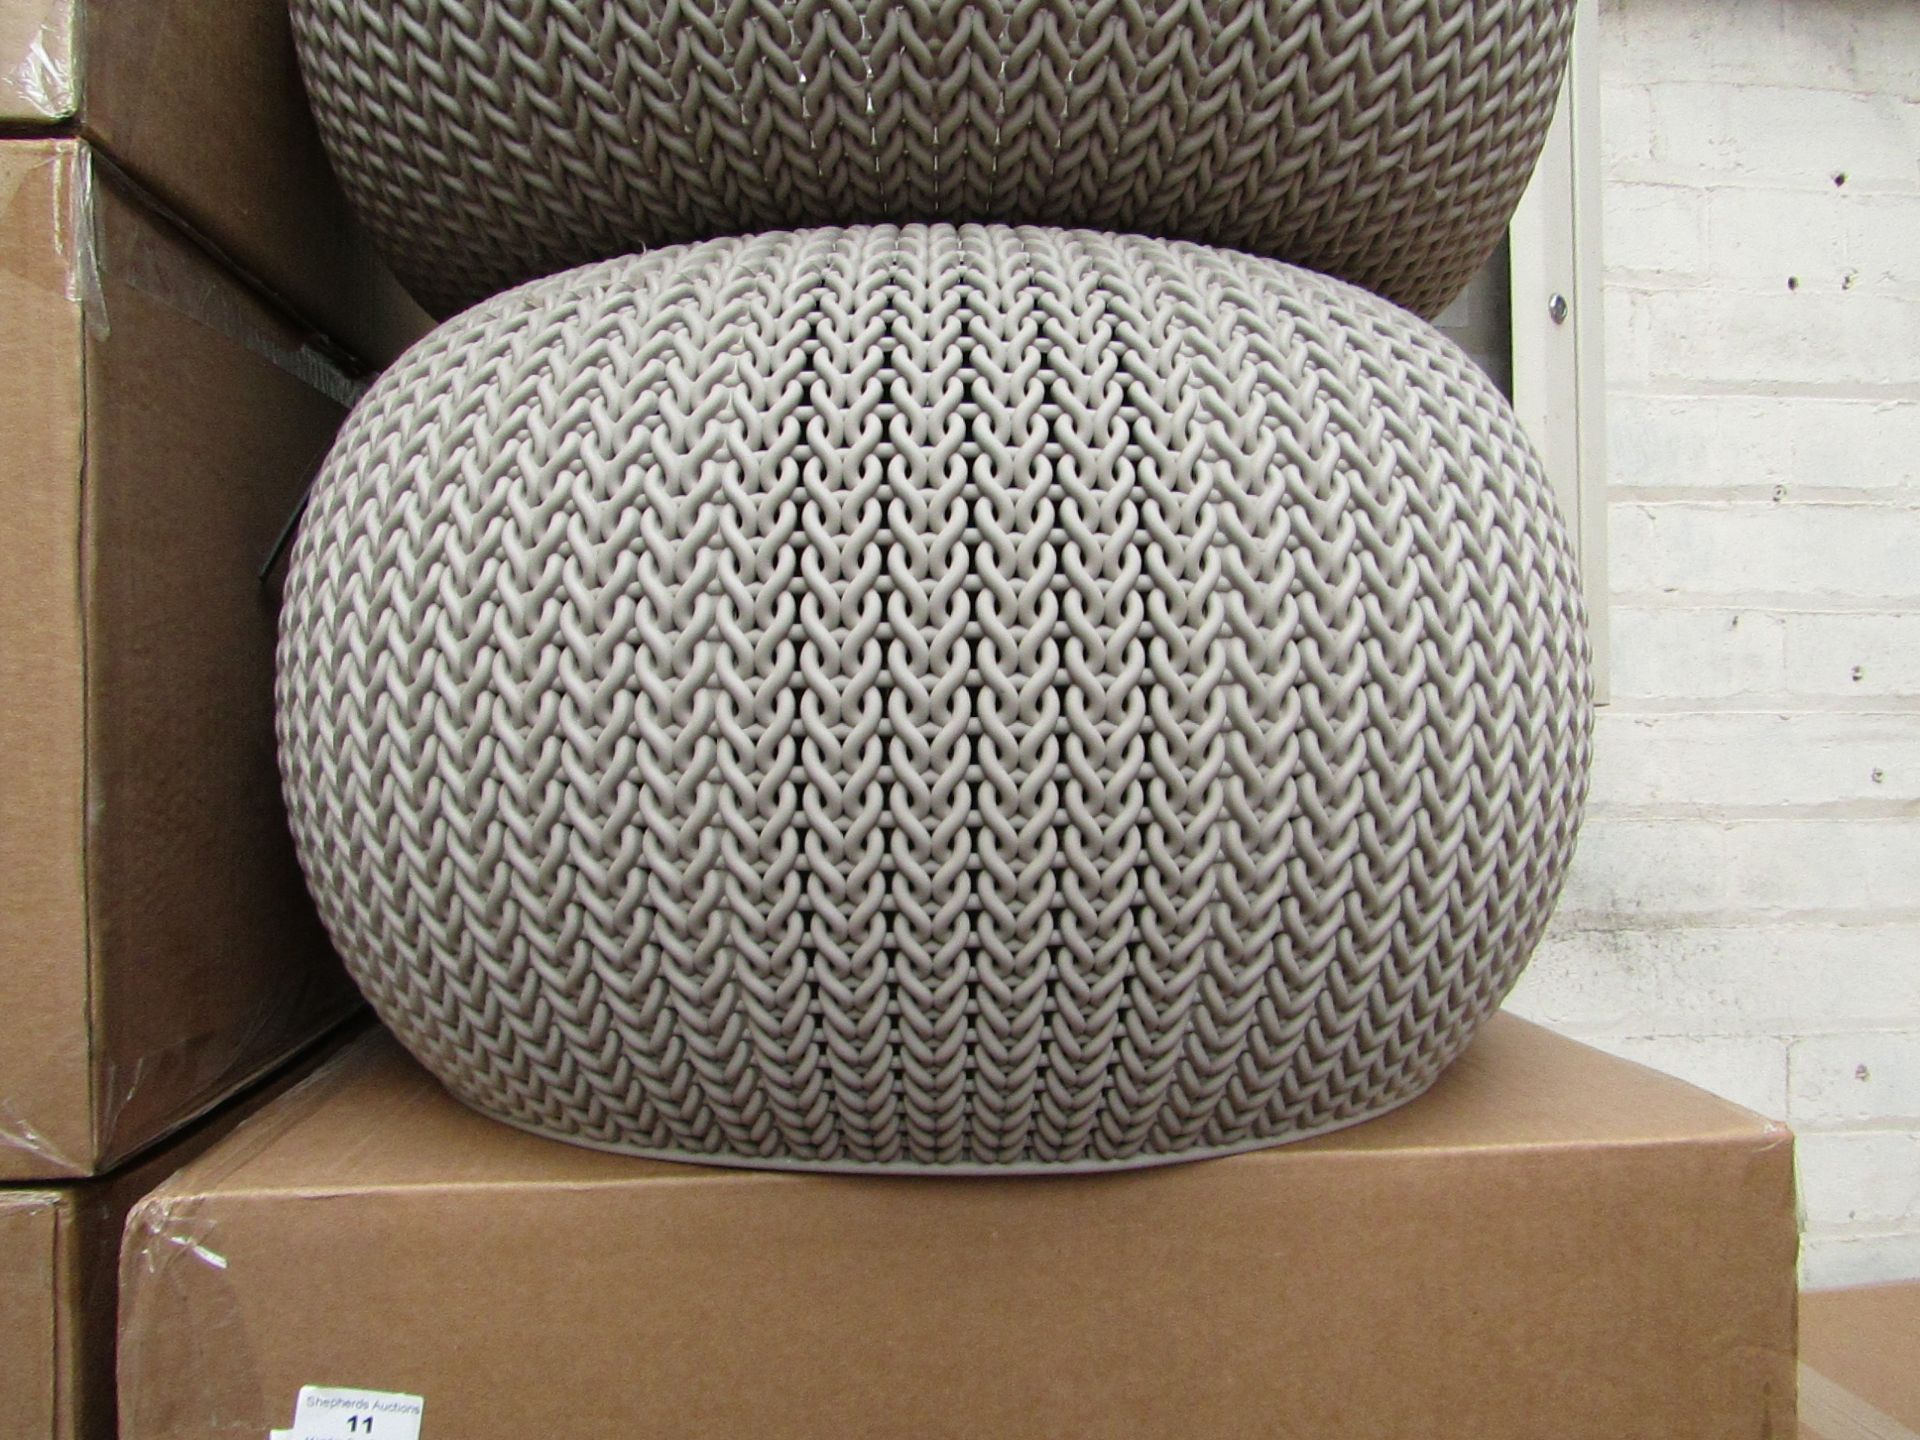 Keter Knit Collection - Cozy Seat - New with Tags & Boxed.